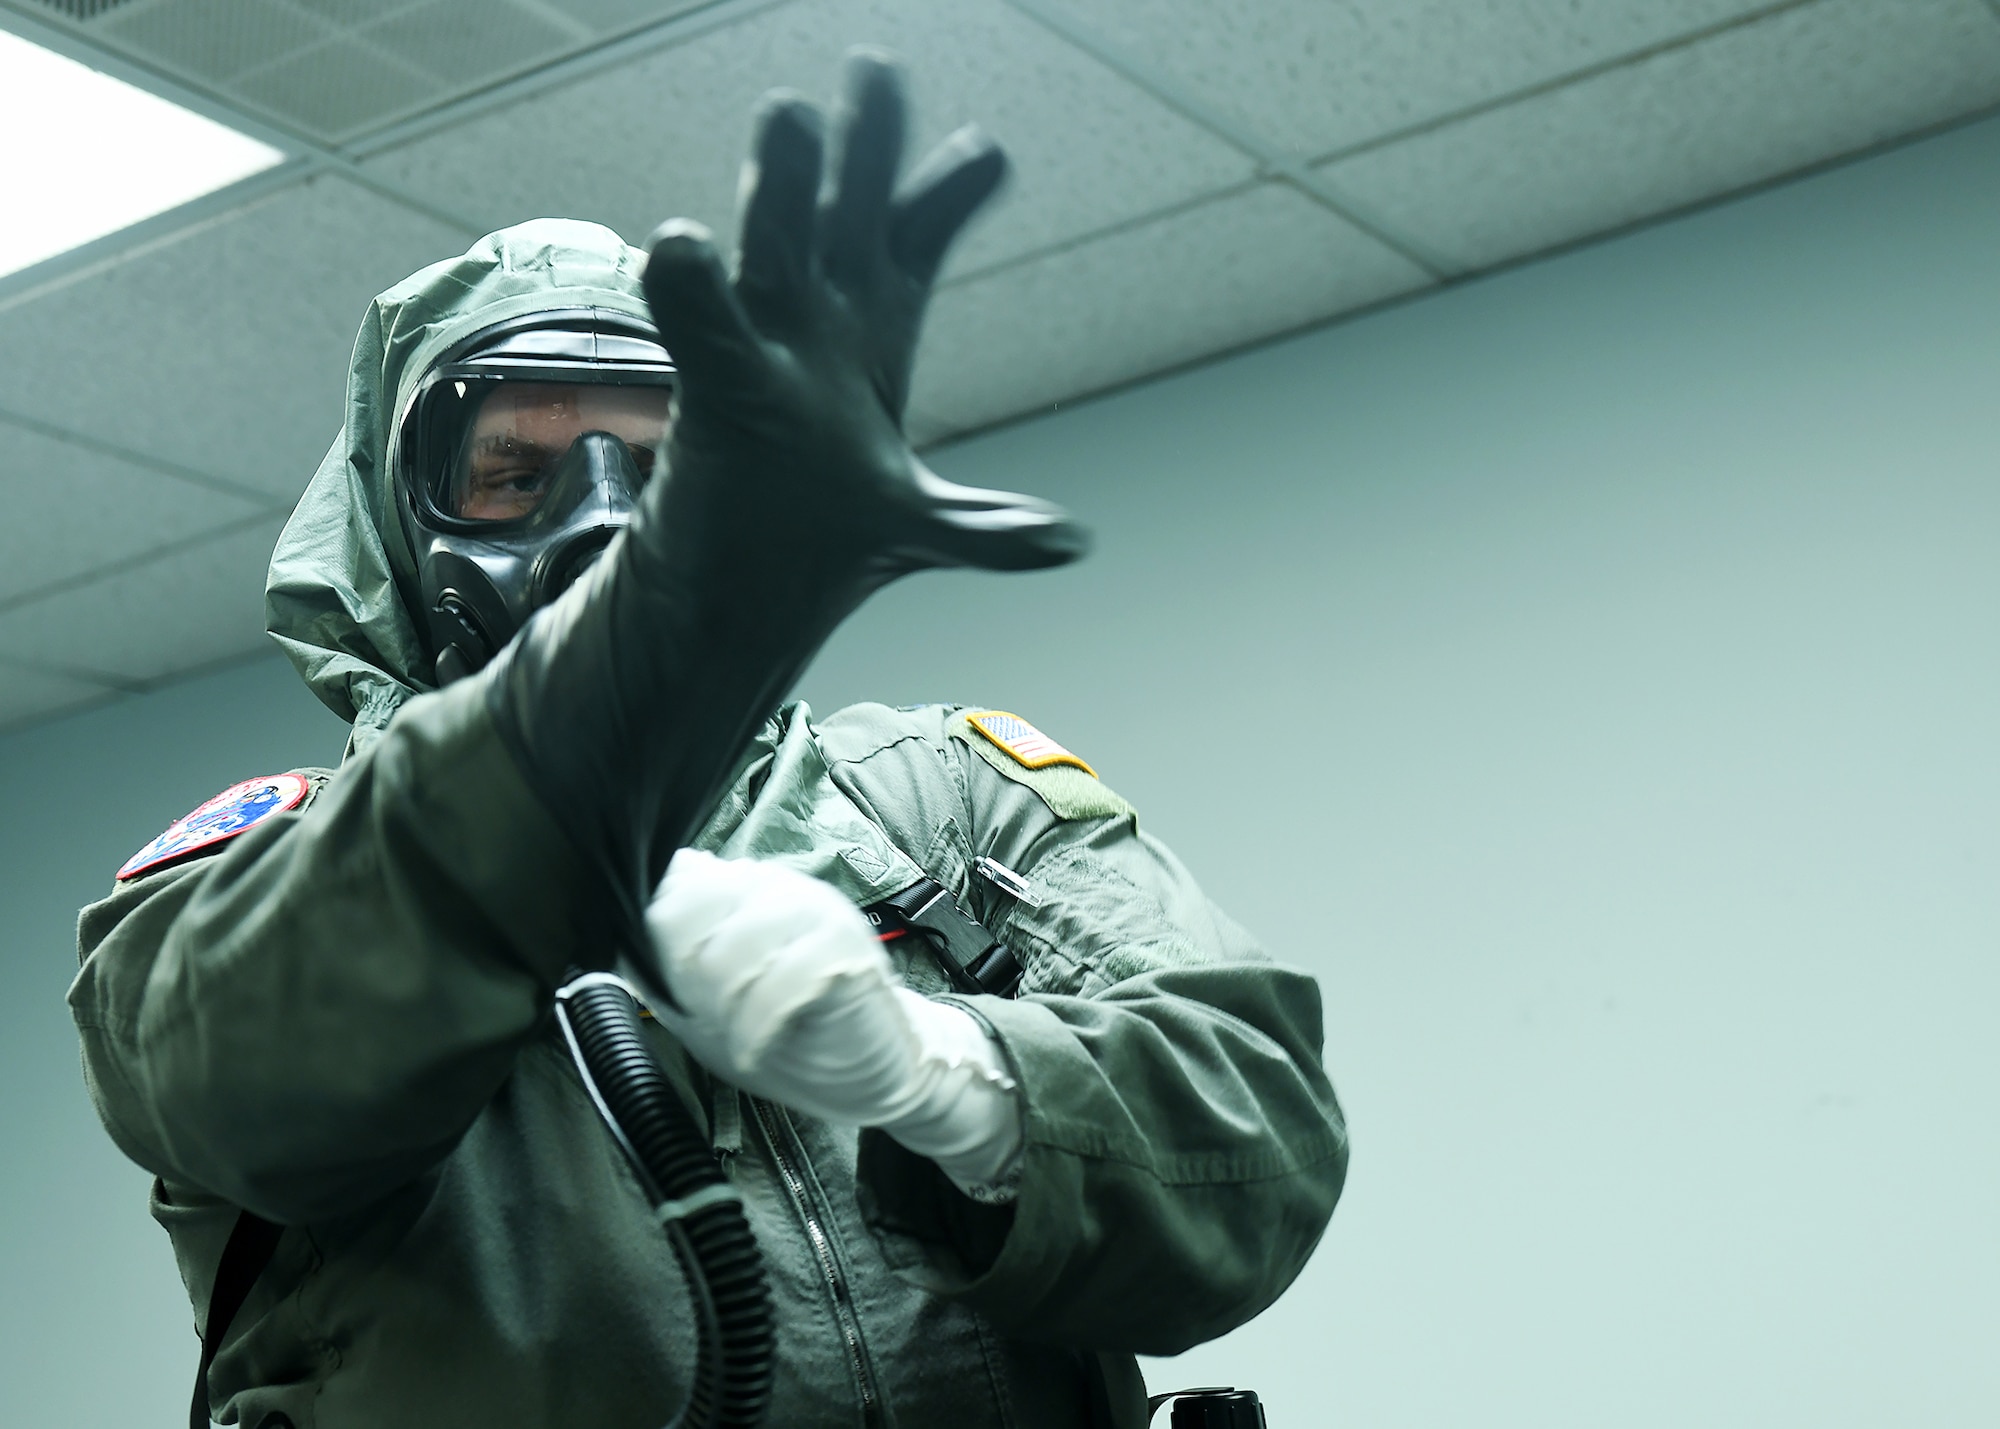 Airman in MOPP gear putting on protective glove